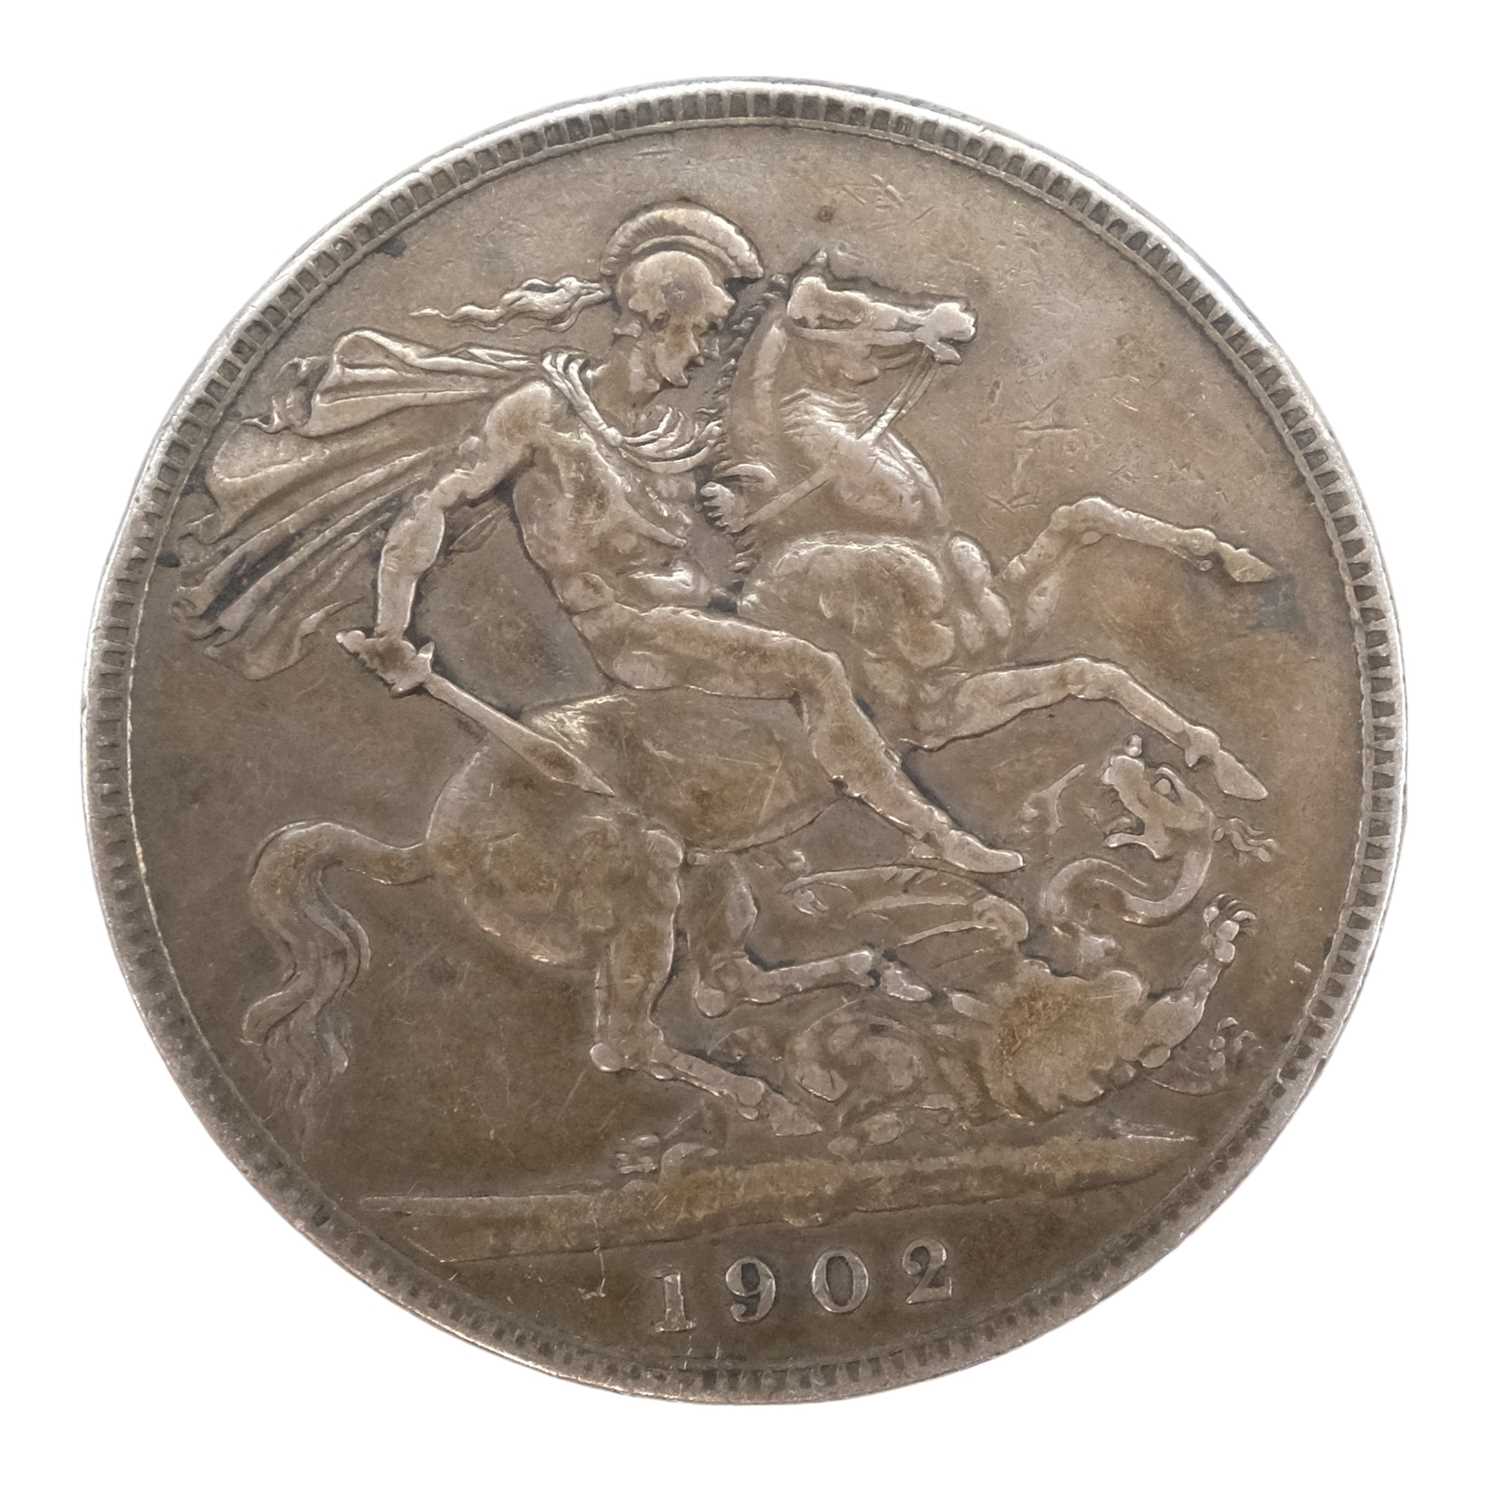 A 1902 silver crown coin - Image 2 of 2